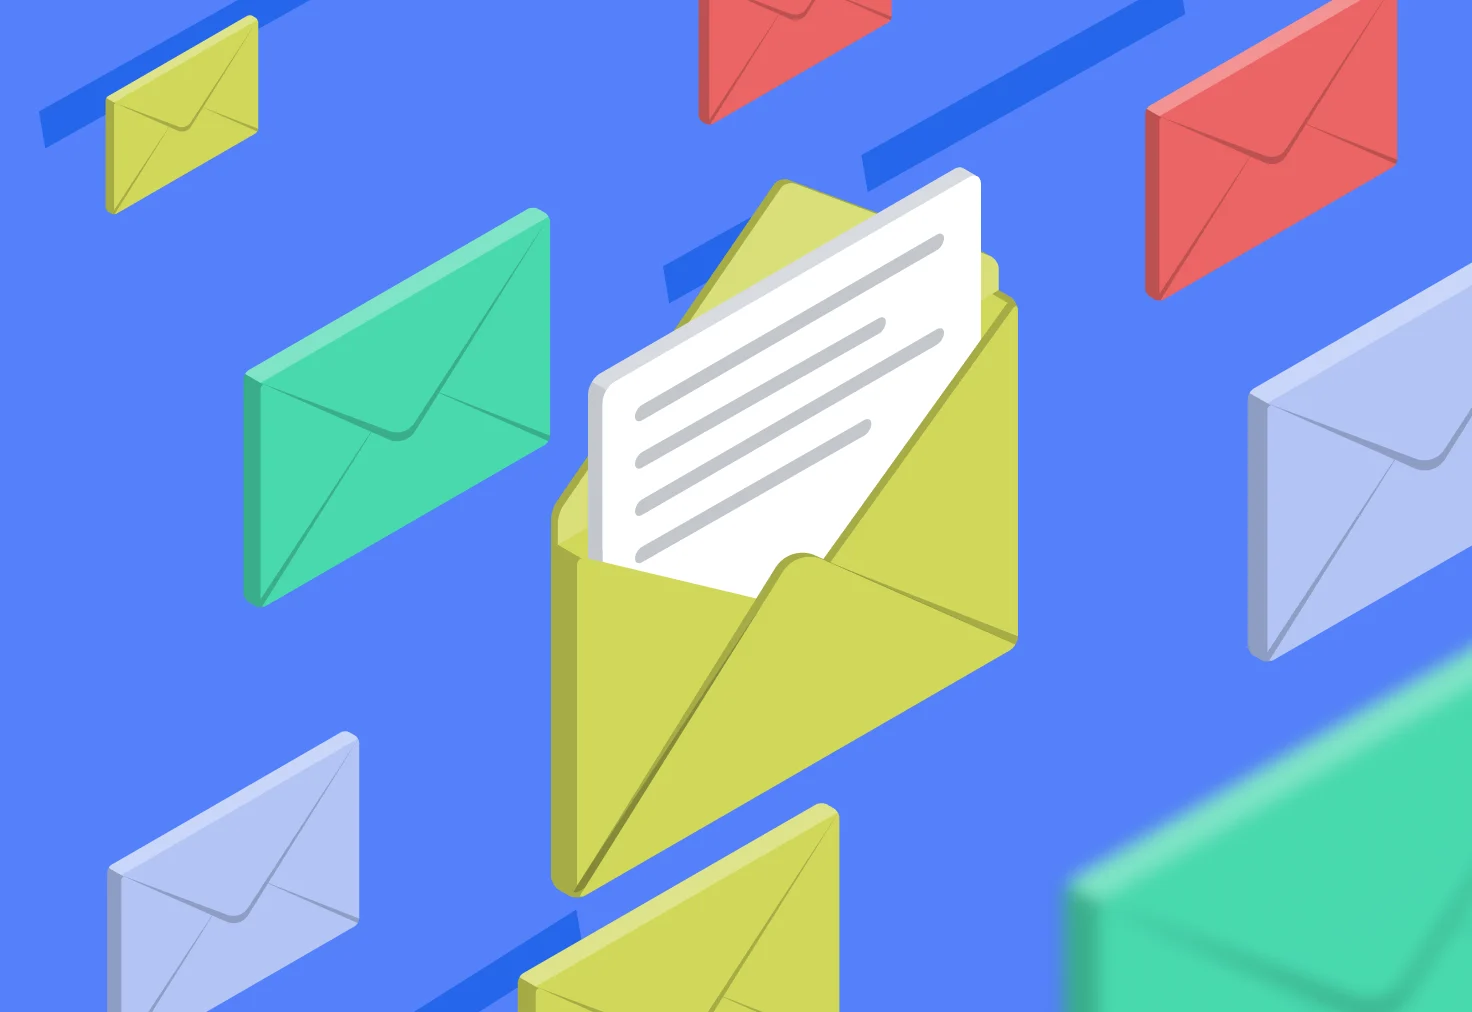 How to Write an Effective Application Letter [with Example & Tips]